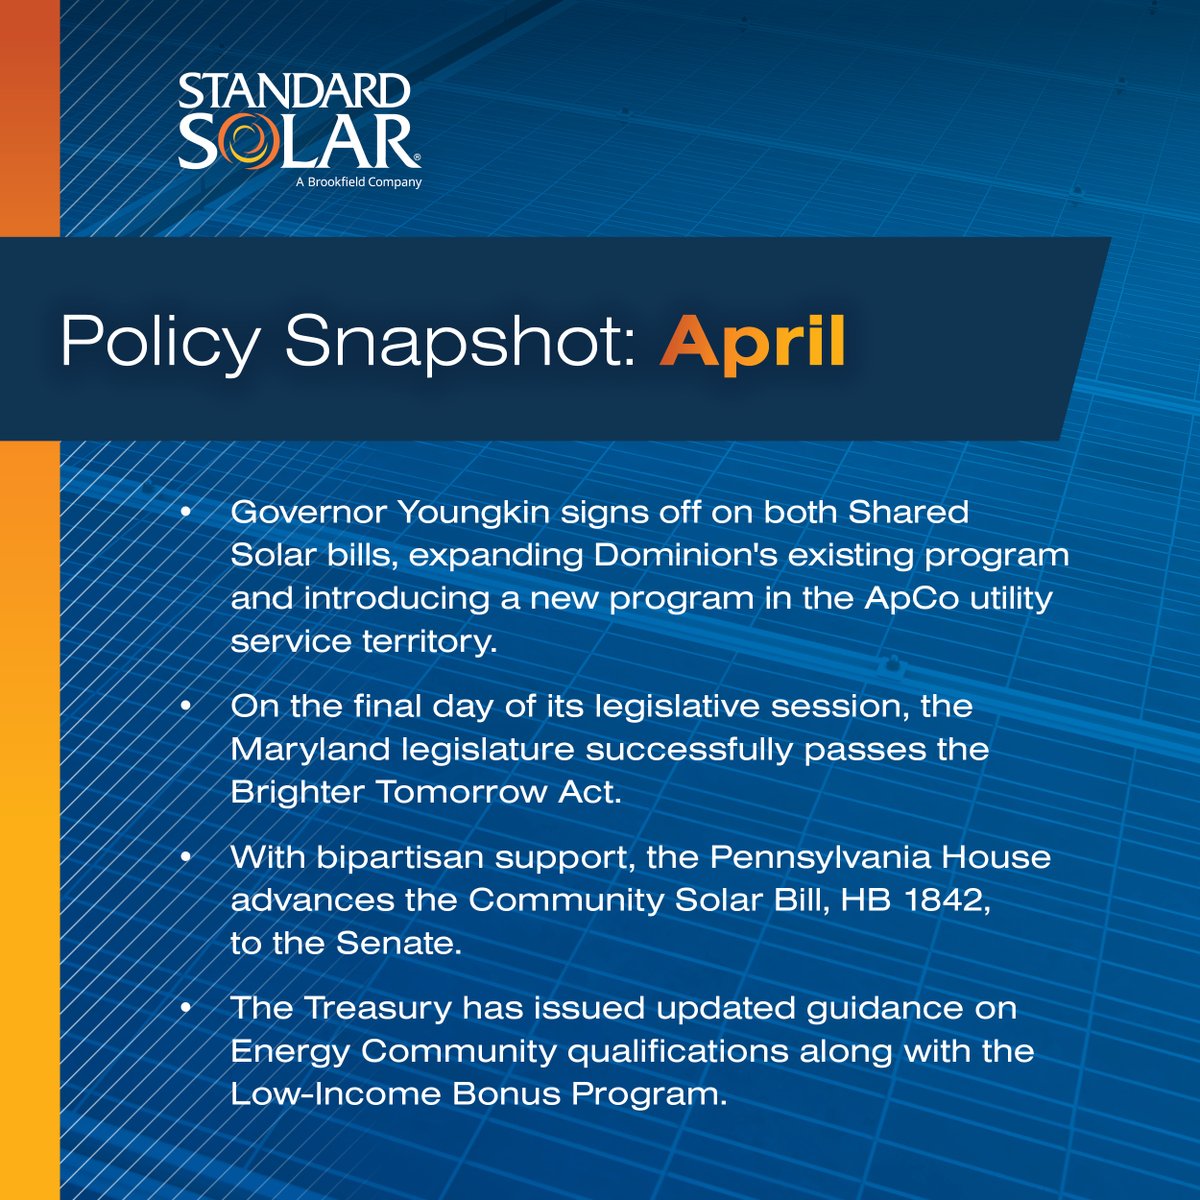 The April Policy Snapshot is out! We touch on positive developments in Maryland, Pennsylvania, Virginia and at the Treasury. Take a look. 

#PoweringTheEnergyTransformation #communitysolar #commercialsolar #assetacquisition